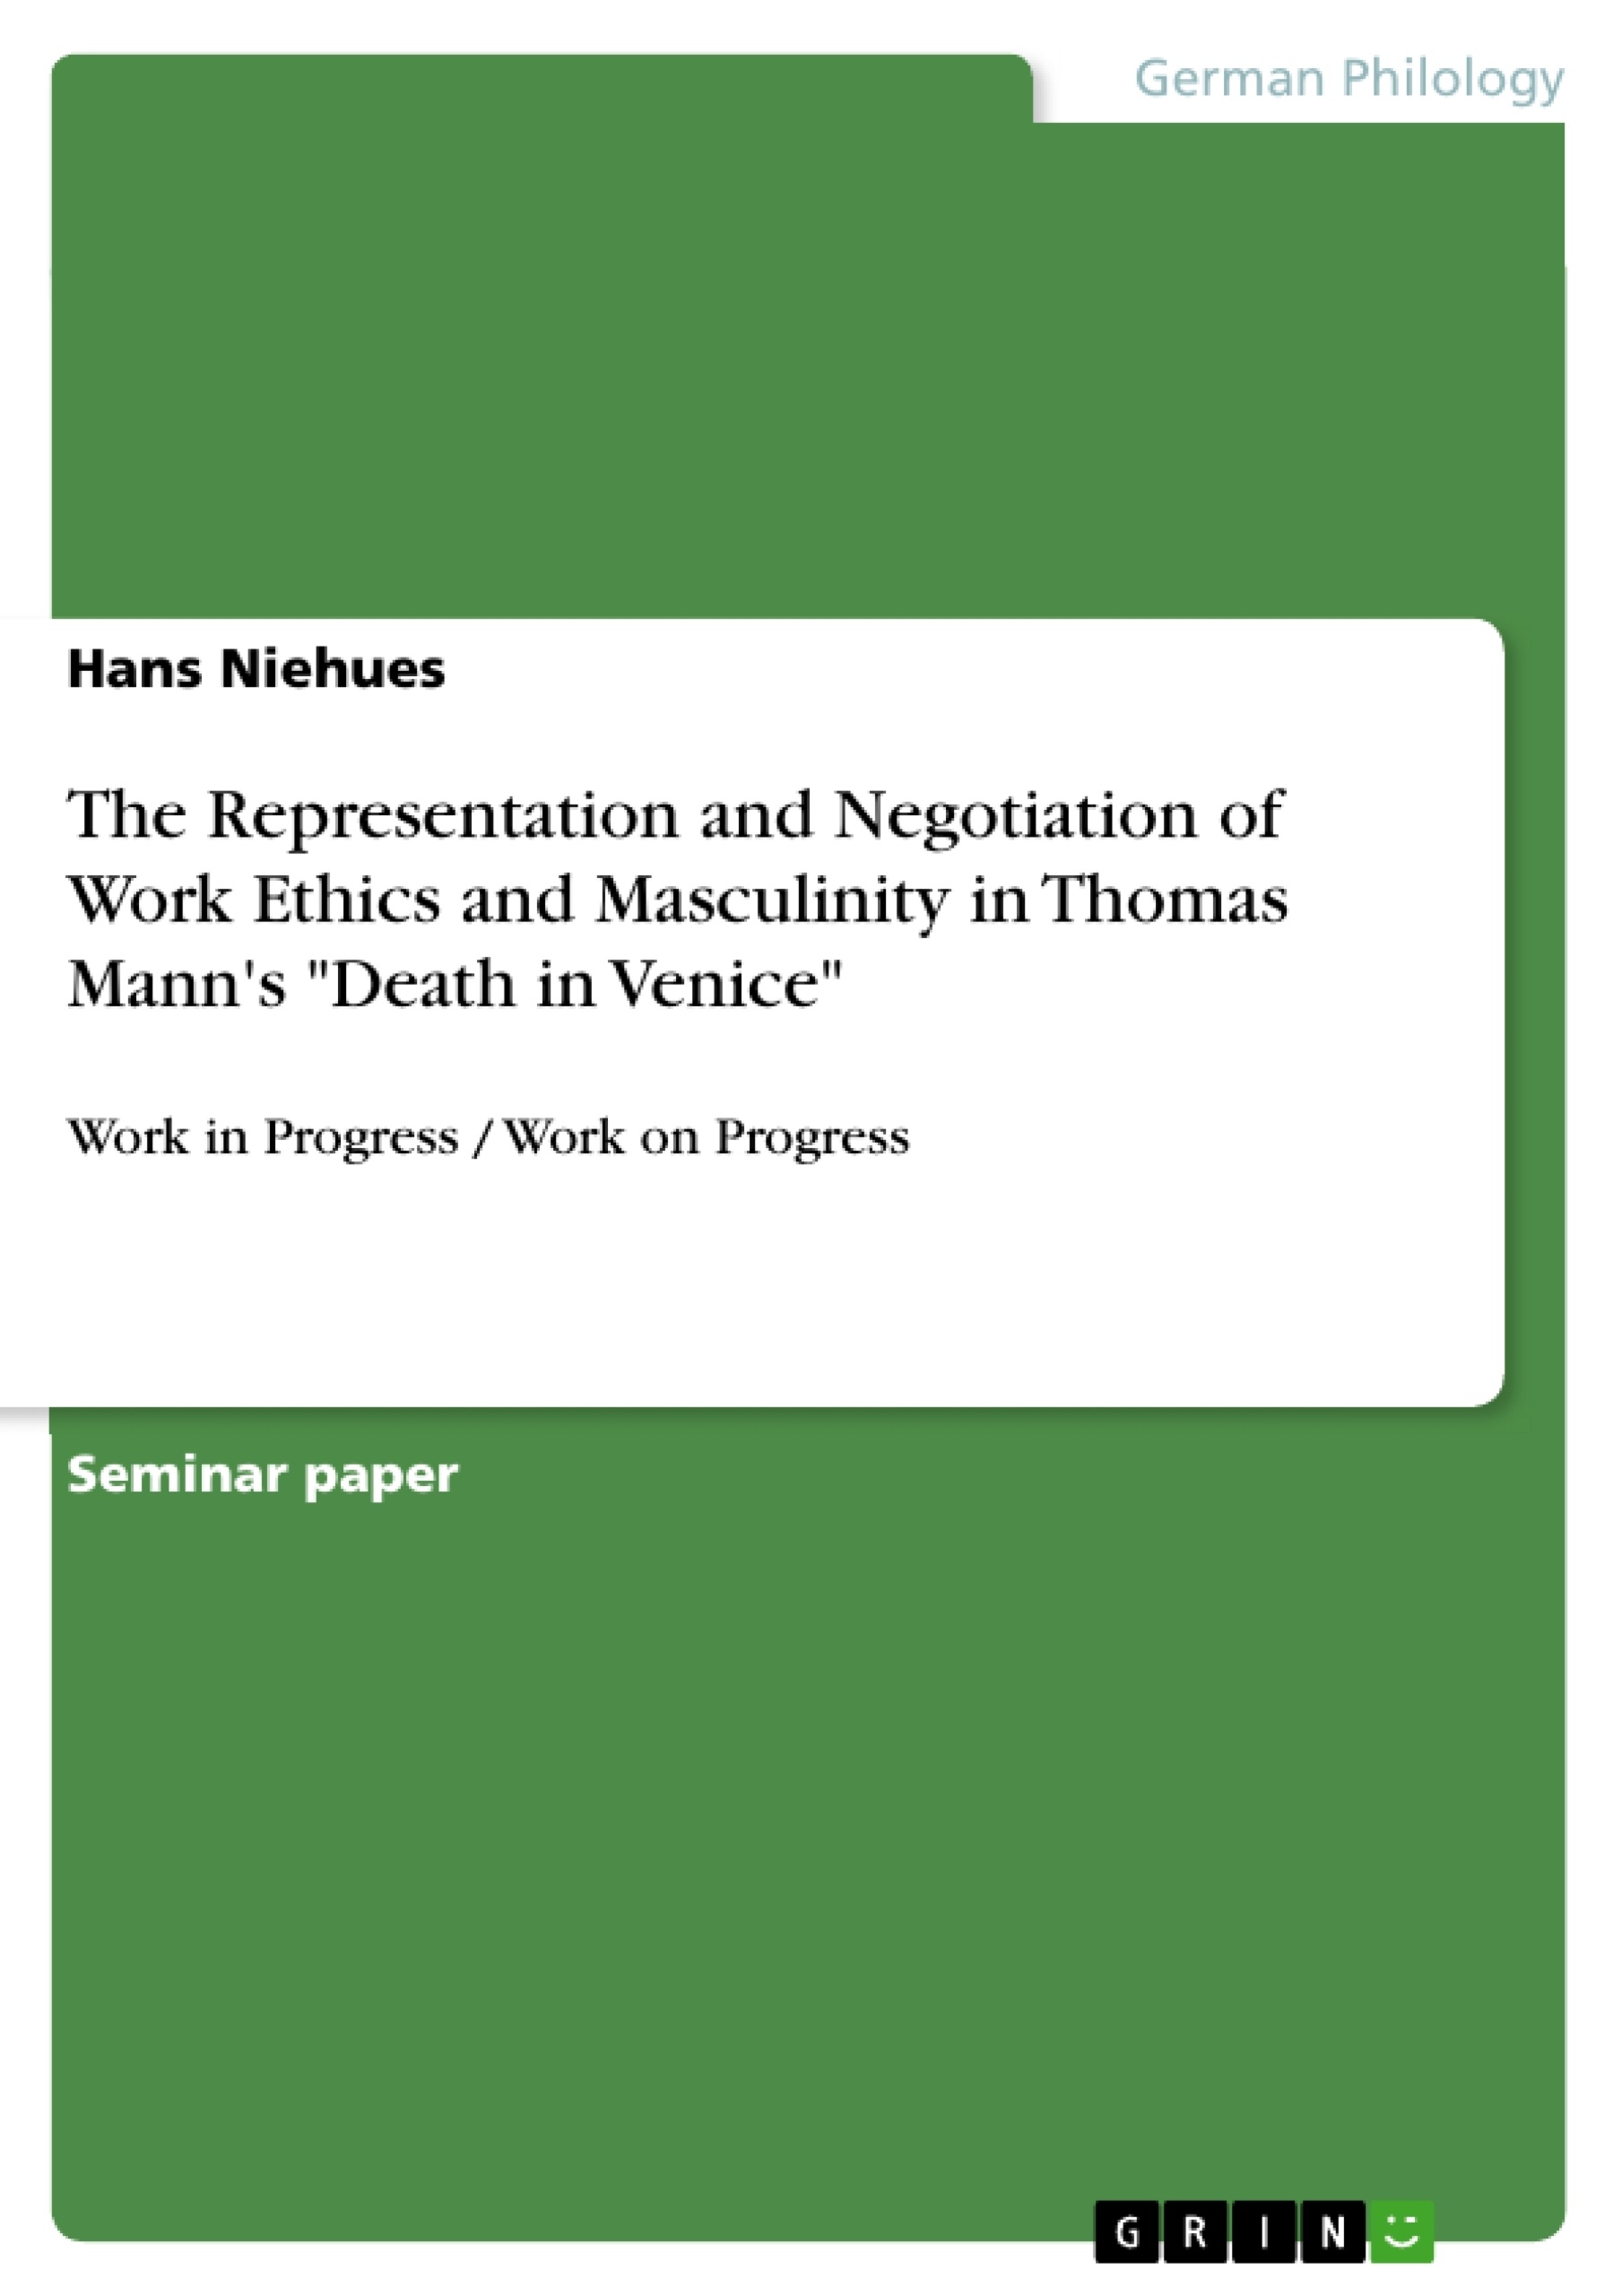 Titre: The Representation and Negotiation of Work Ethics and Masculinity in Thomas Mann's "Death in Venice"